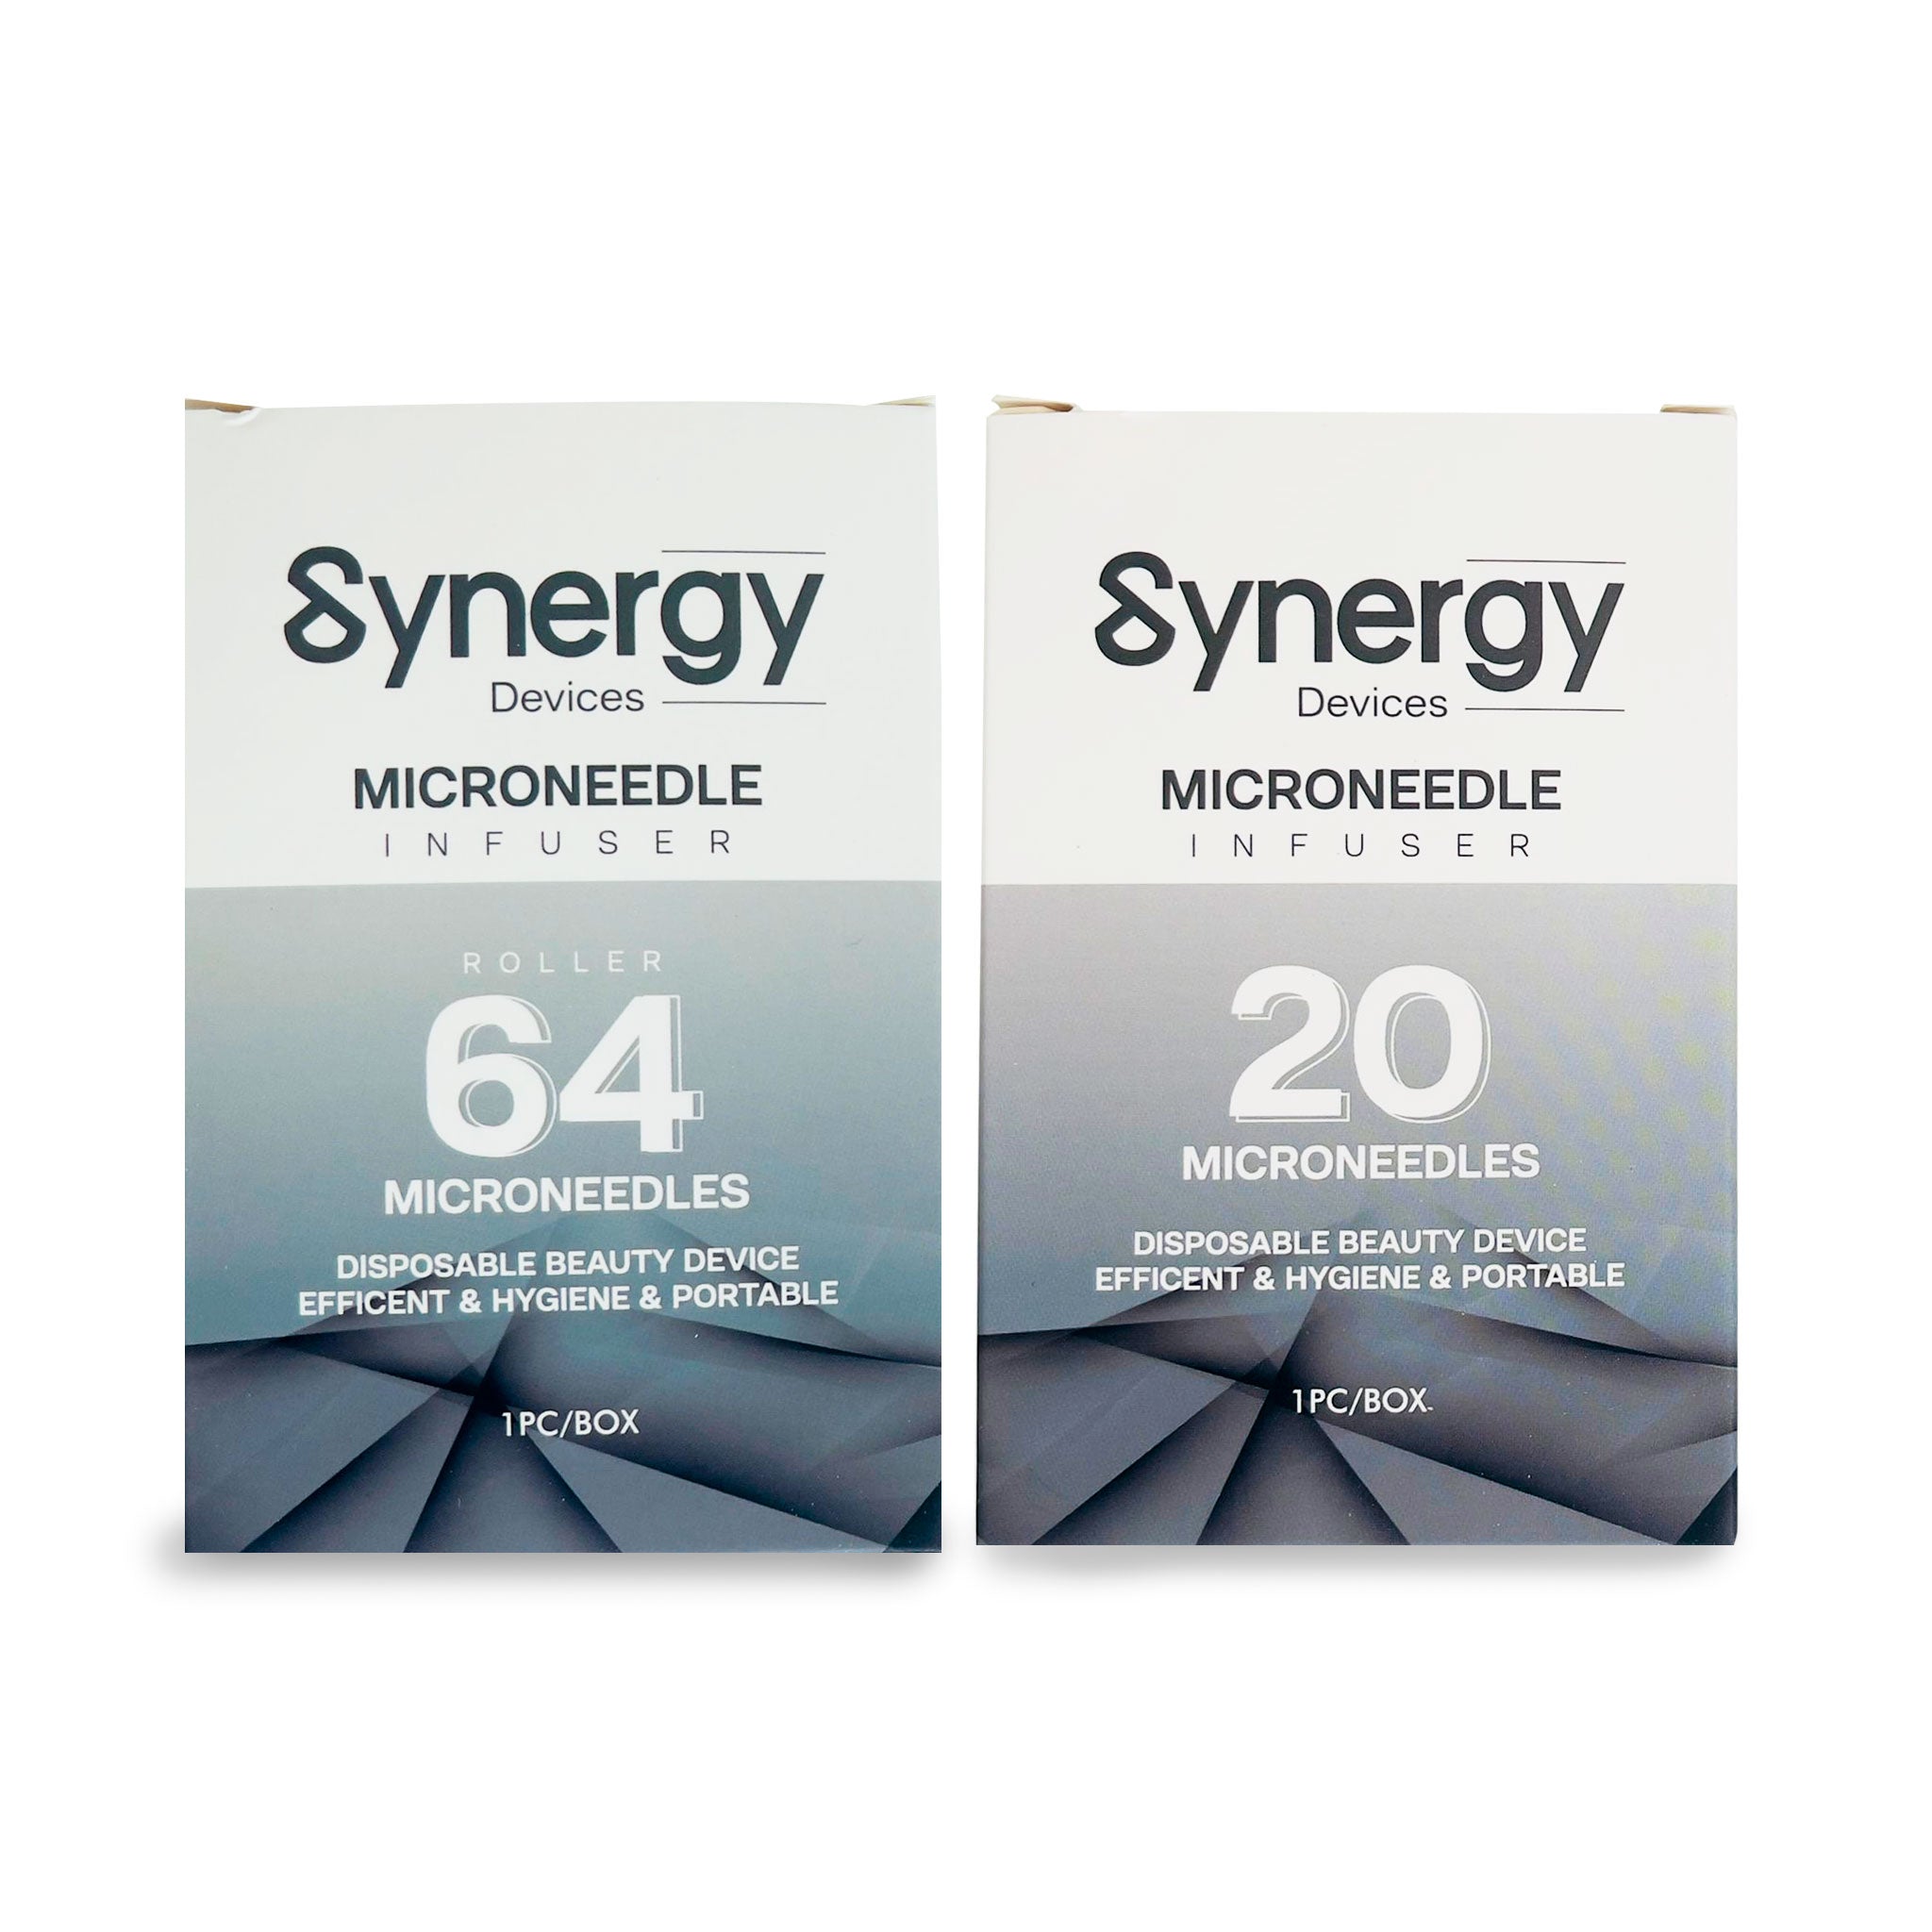 Microneedle Infuser Synergy Microagujas para Mesoterapia